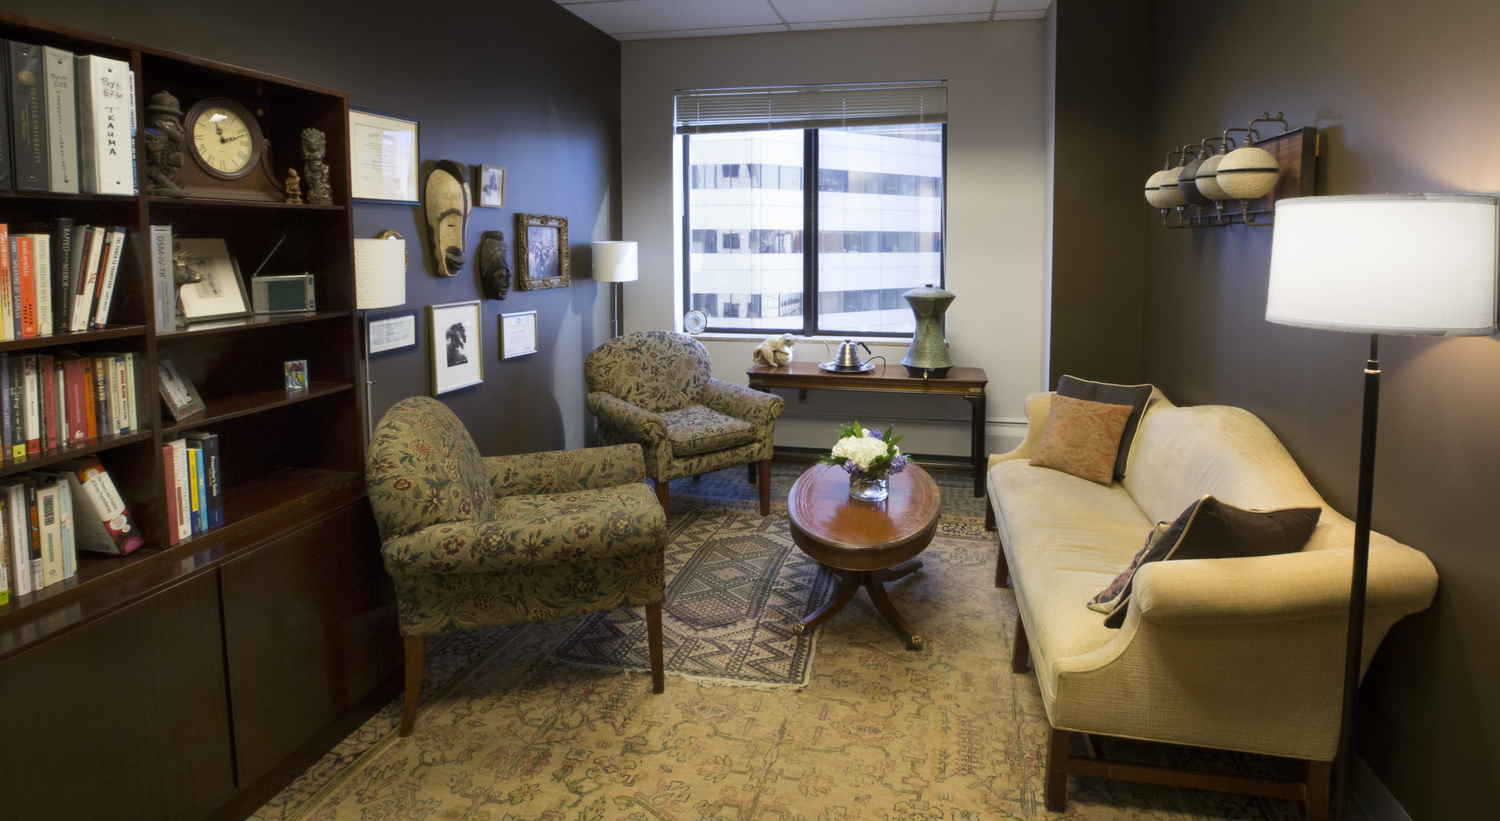 Gallery Photo of South Lake Union Therapy Office